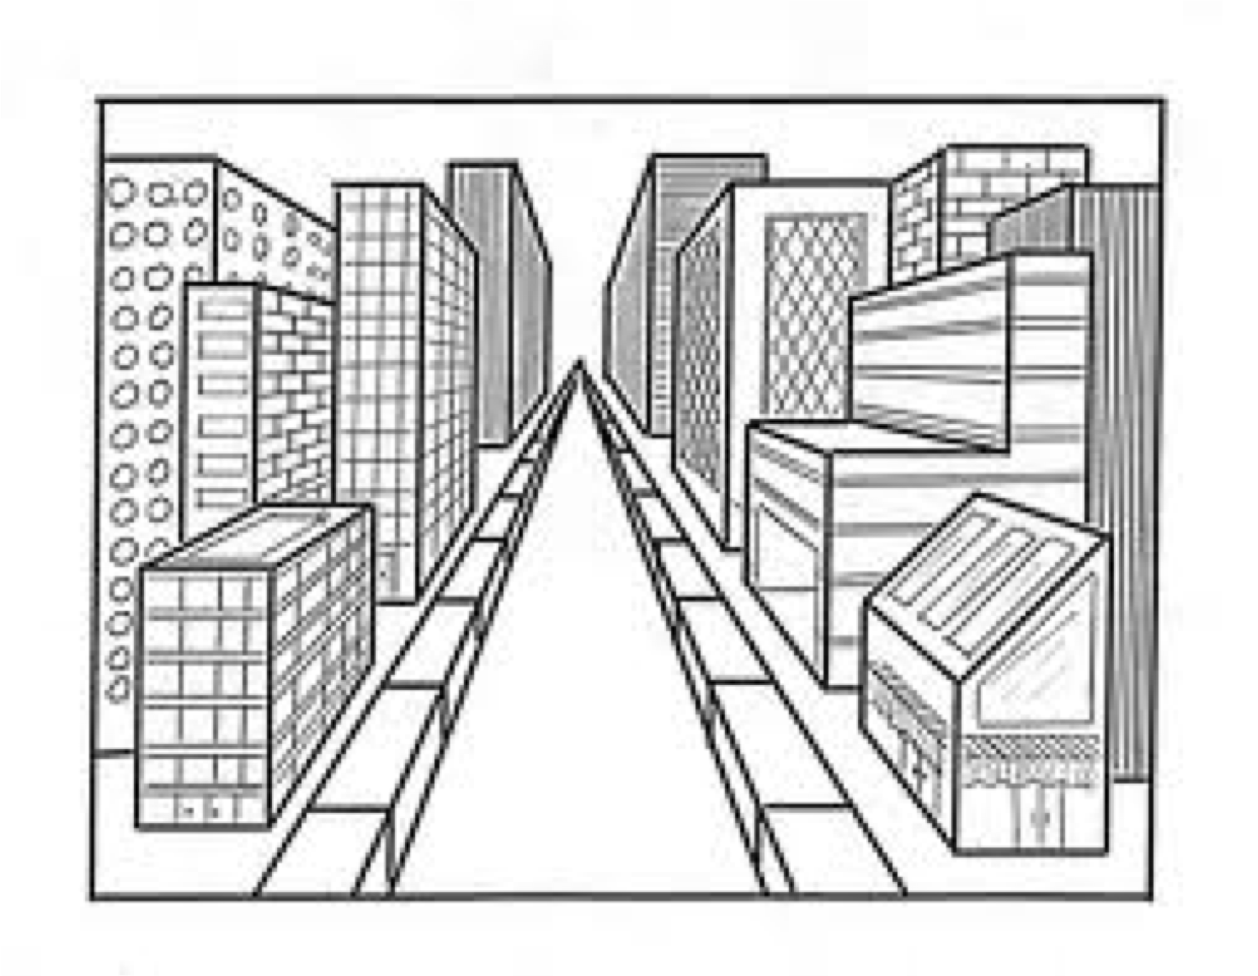 1 and 2 point perspective